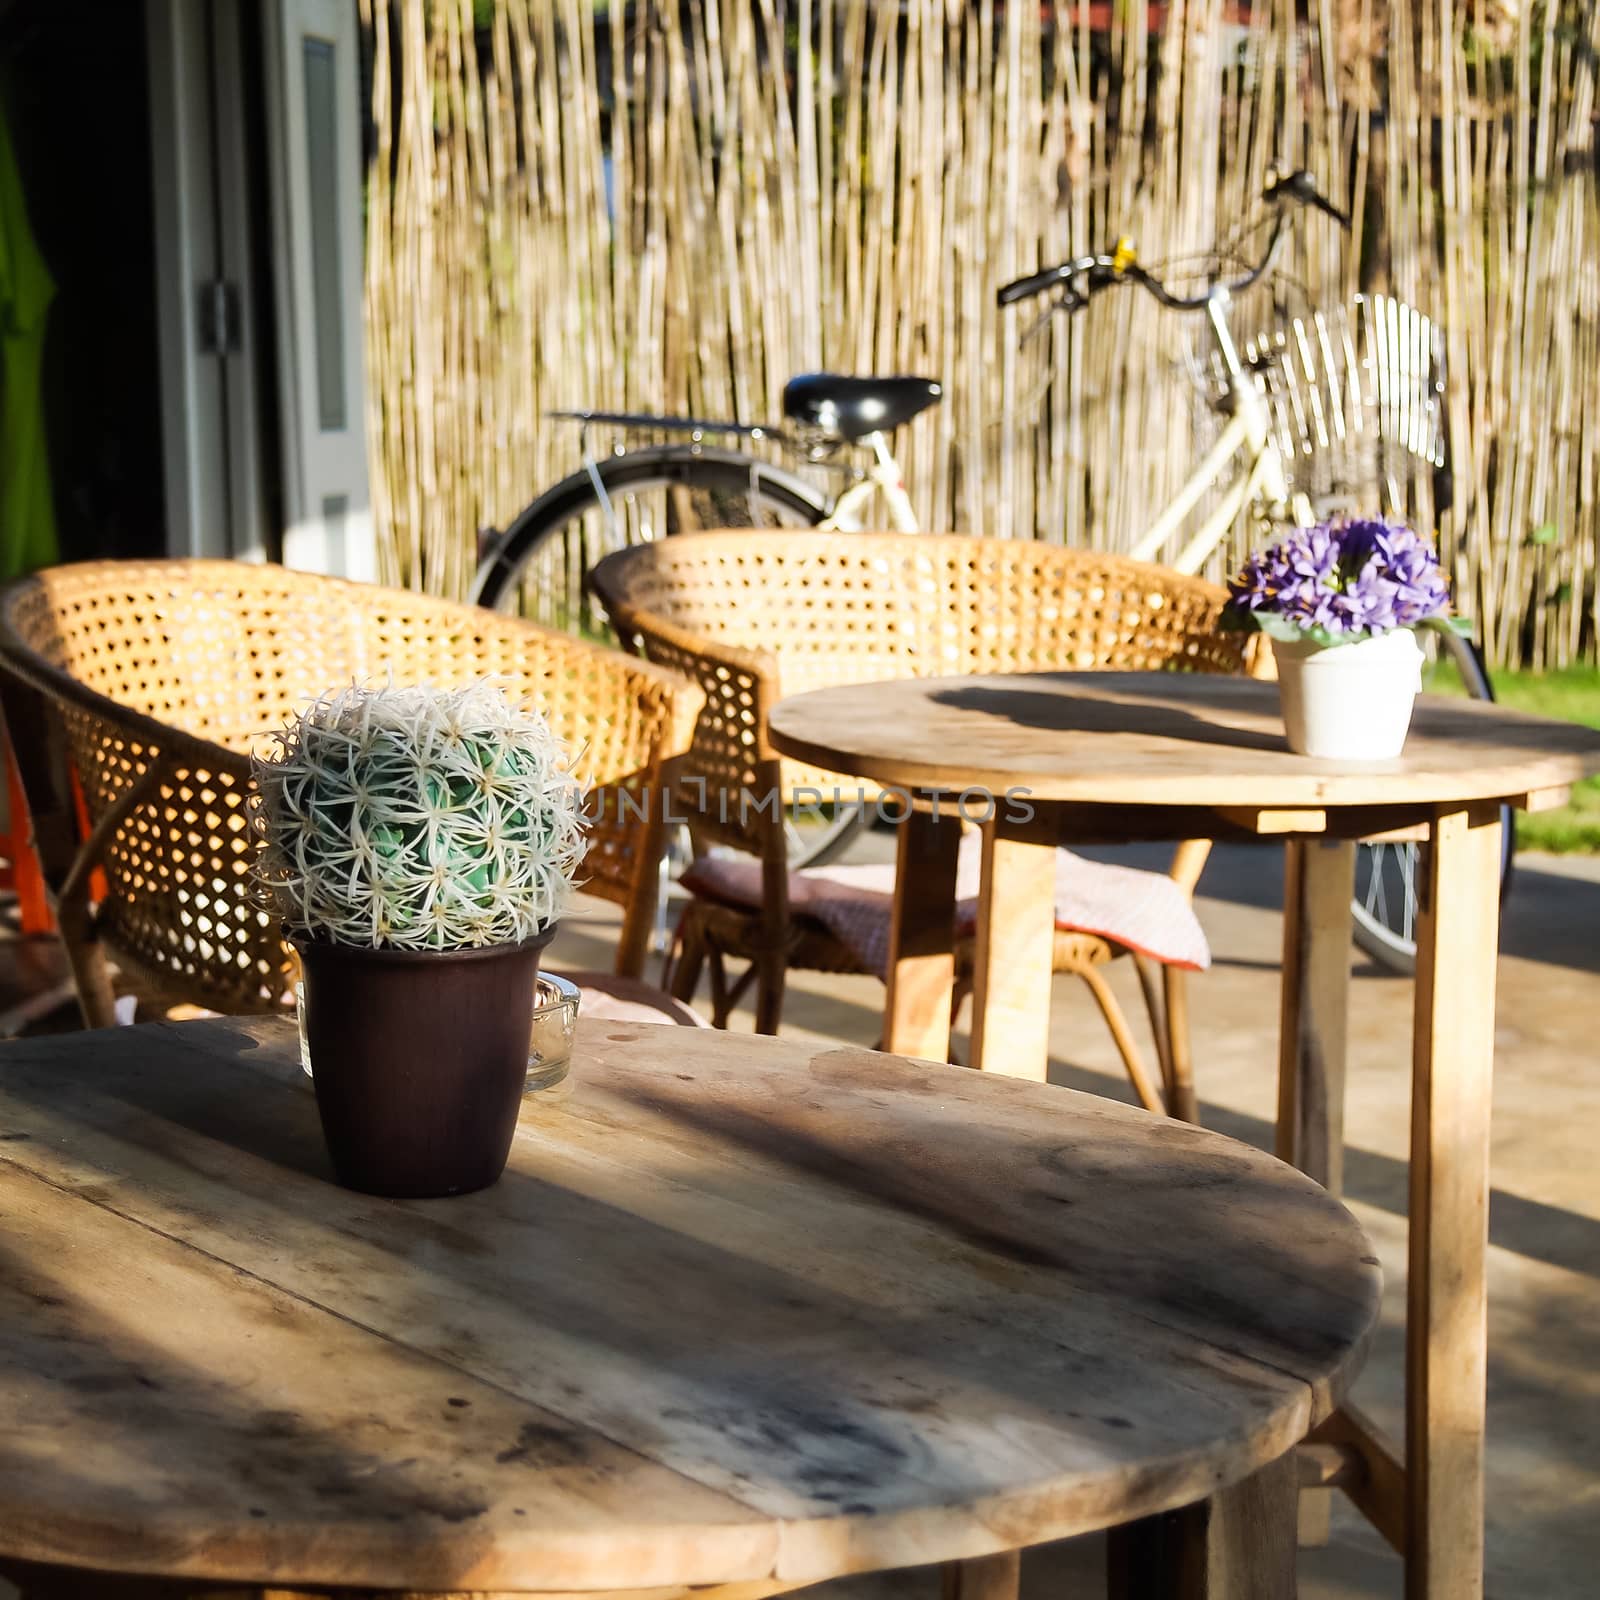 Wooden table seats peace , chairs , flower vase, bicycle and cactus in coffee cafe